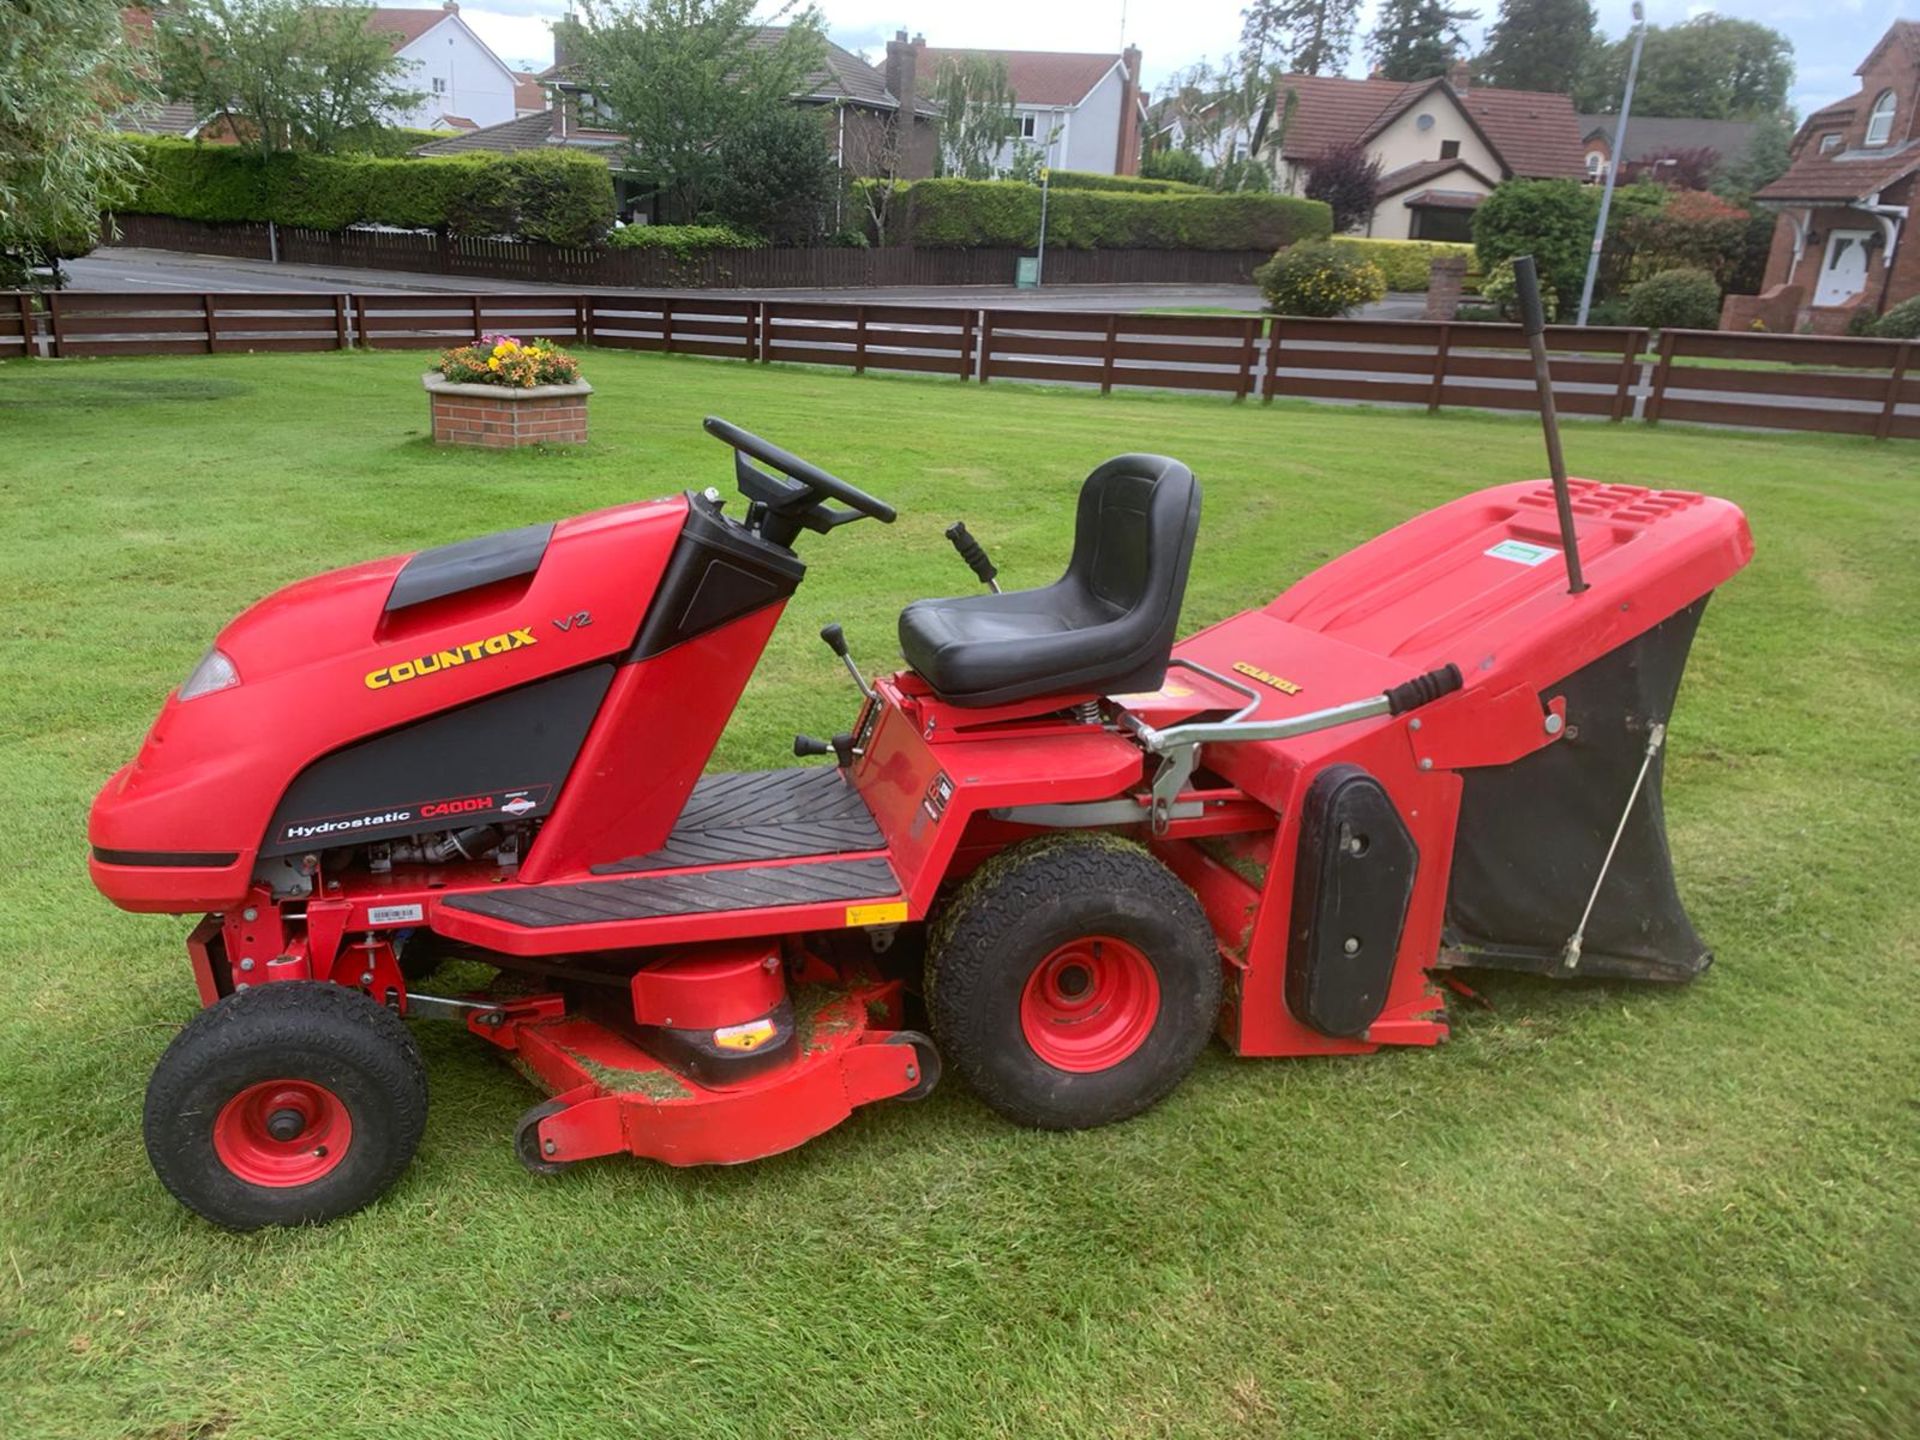 Countax C400H Hydrostatic Ride On Mower - Image 2 of 2